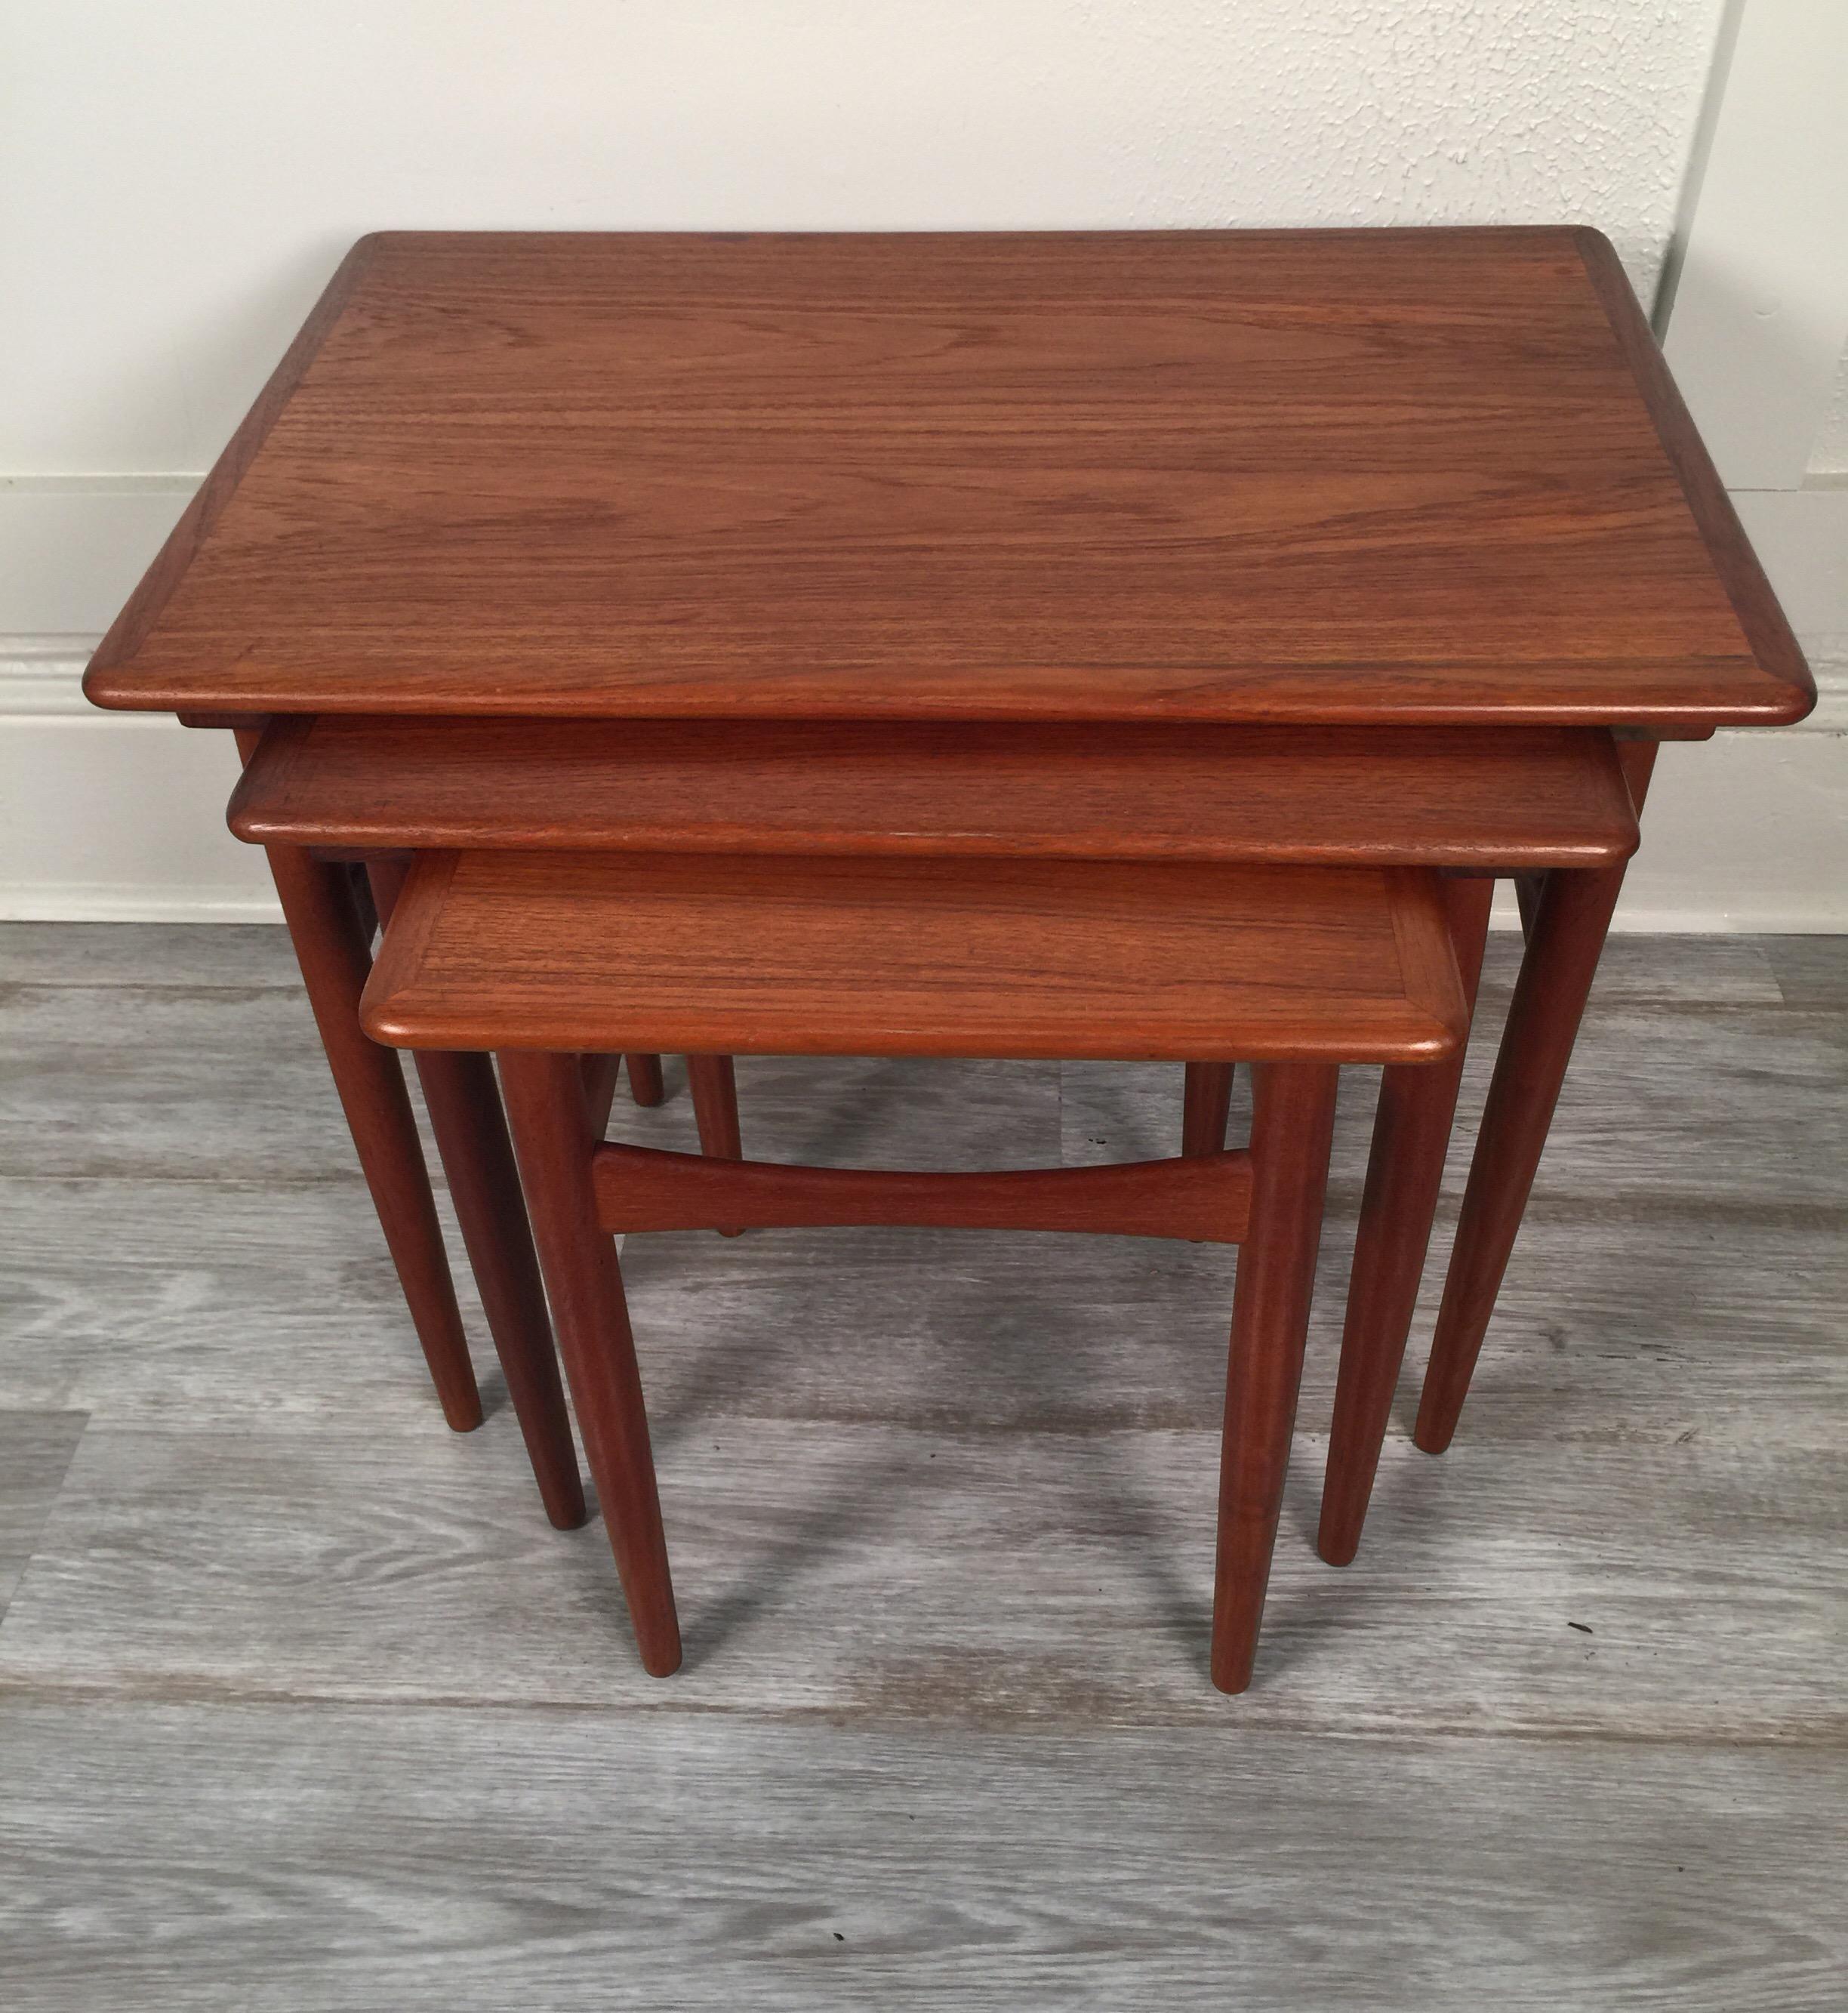 Beautiful and well-made set of three Danish teak nesting tables. This set features banded edges and a nice warm patina.